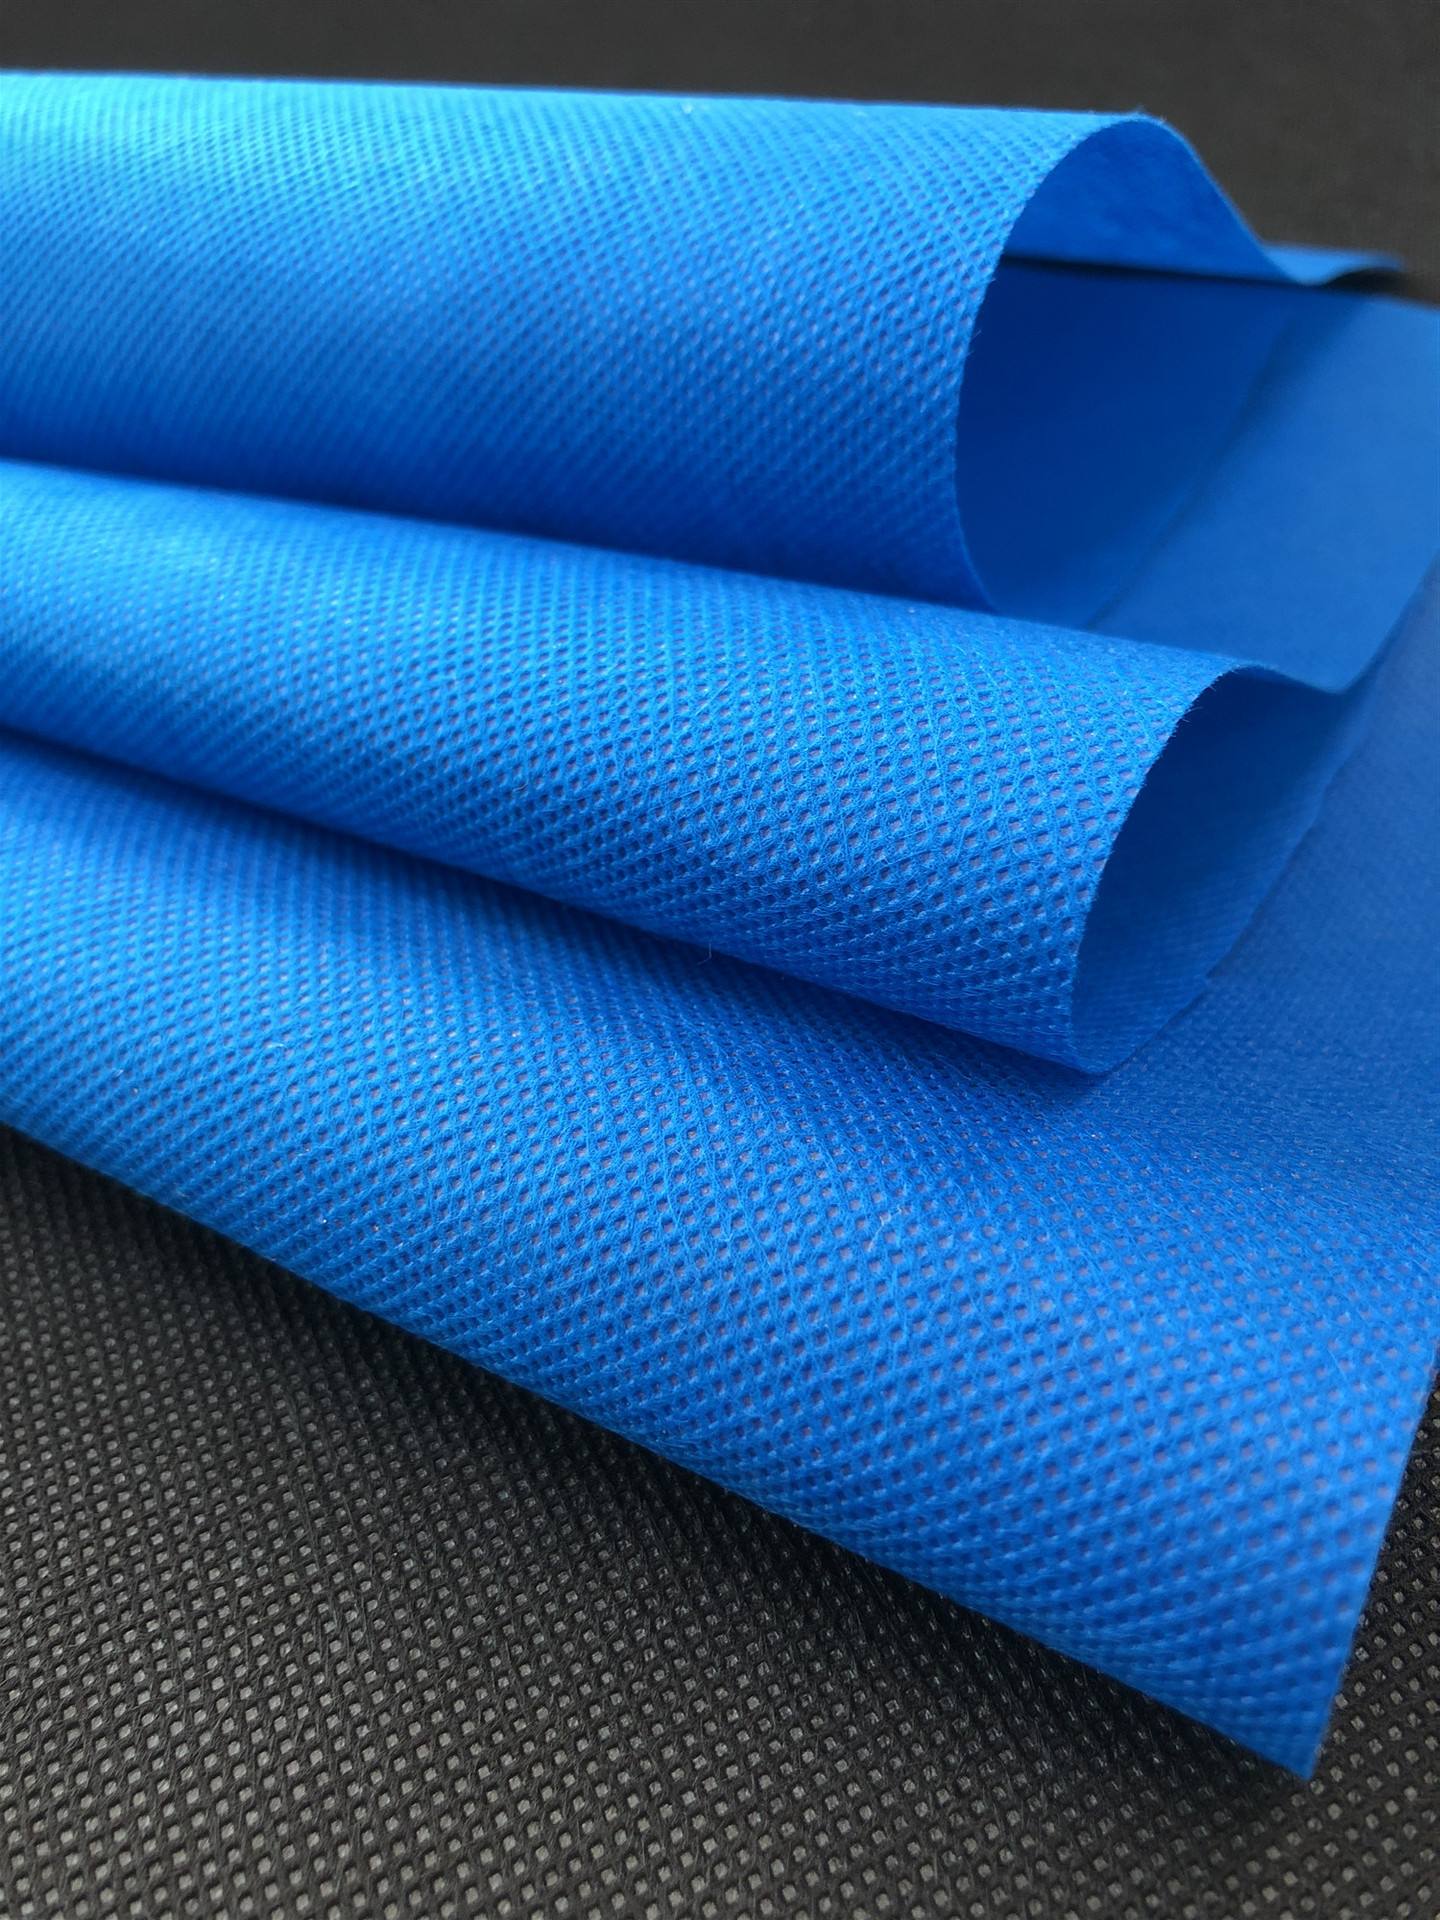 PP PE Coated Non Woven Fabric Waterproof For Environmental Protection Bags 0